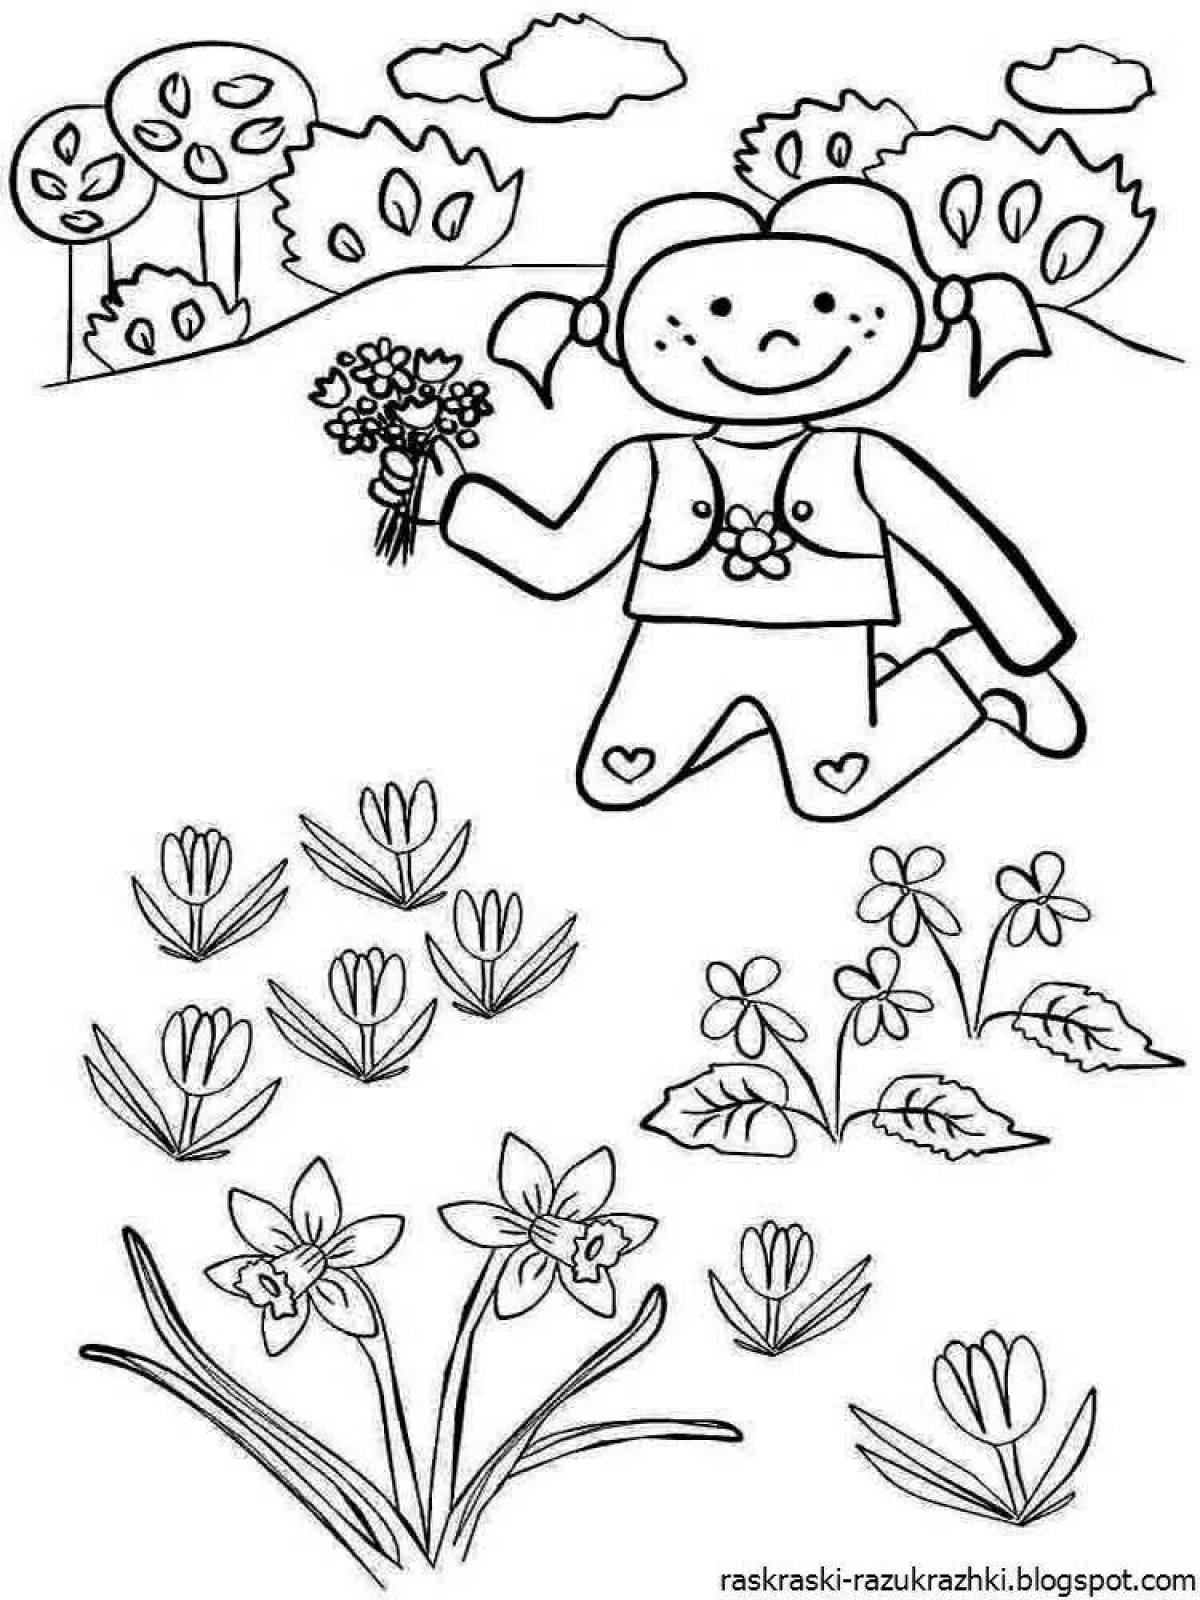 A fun spring coloring book for kids 4-5 years old